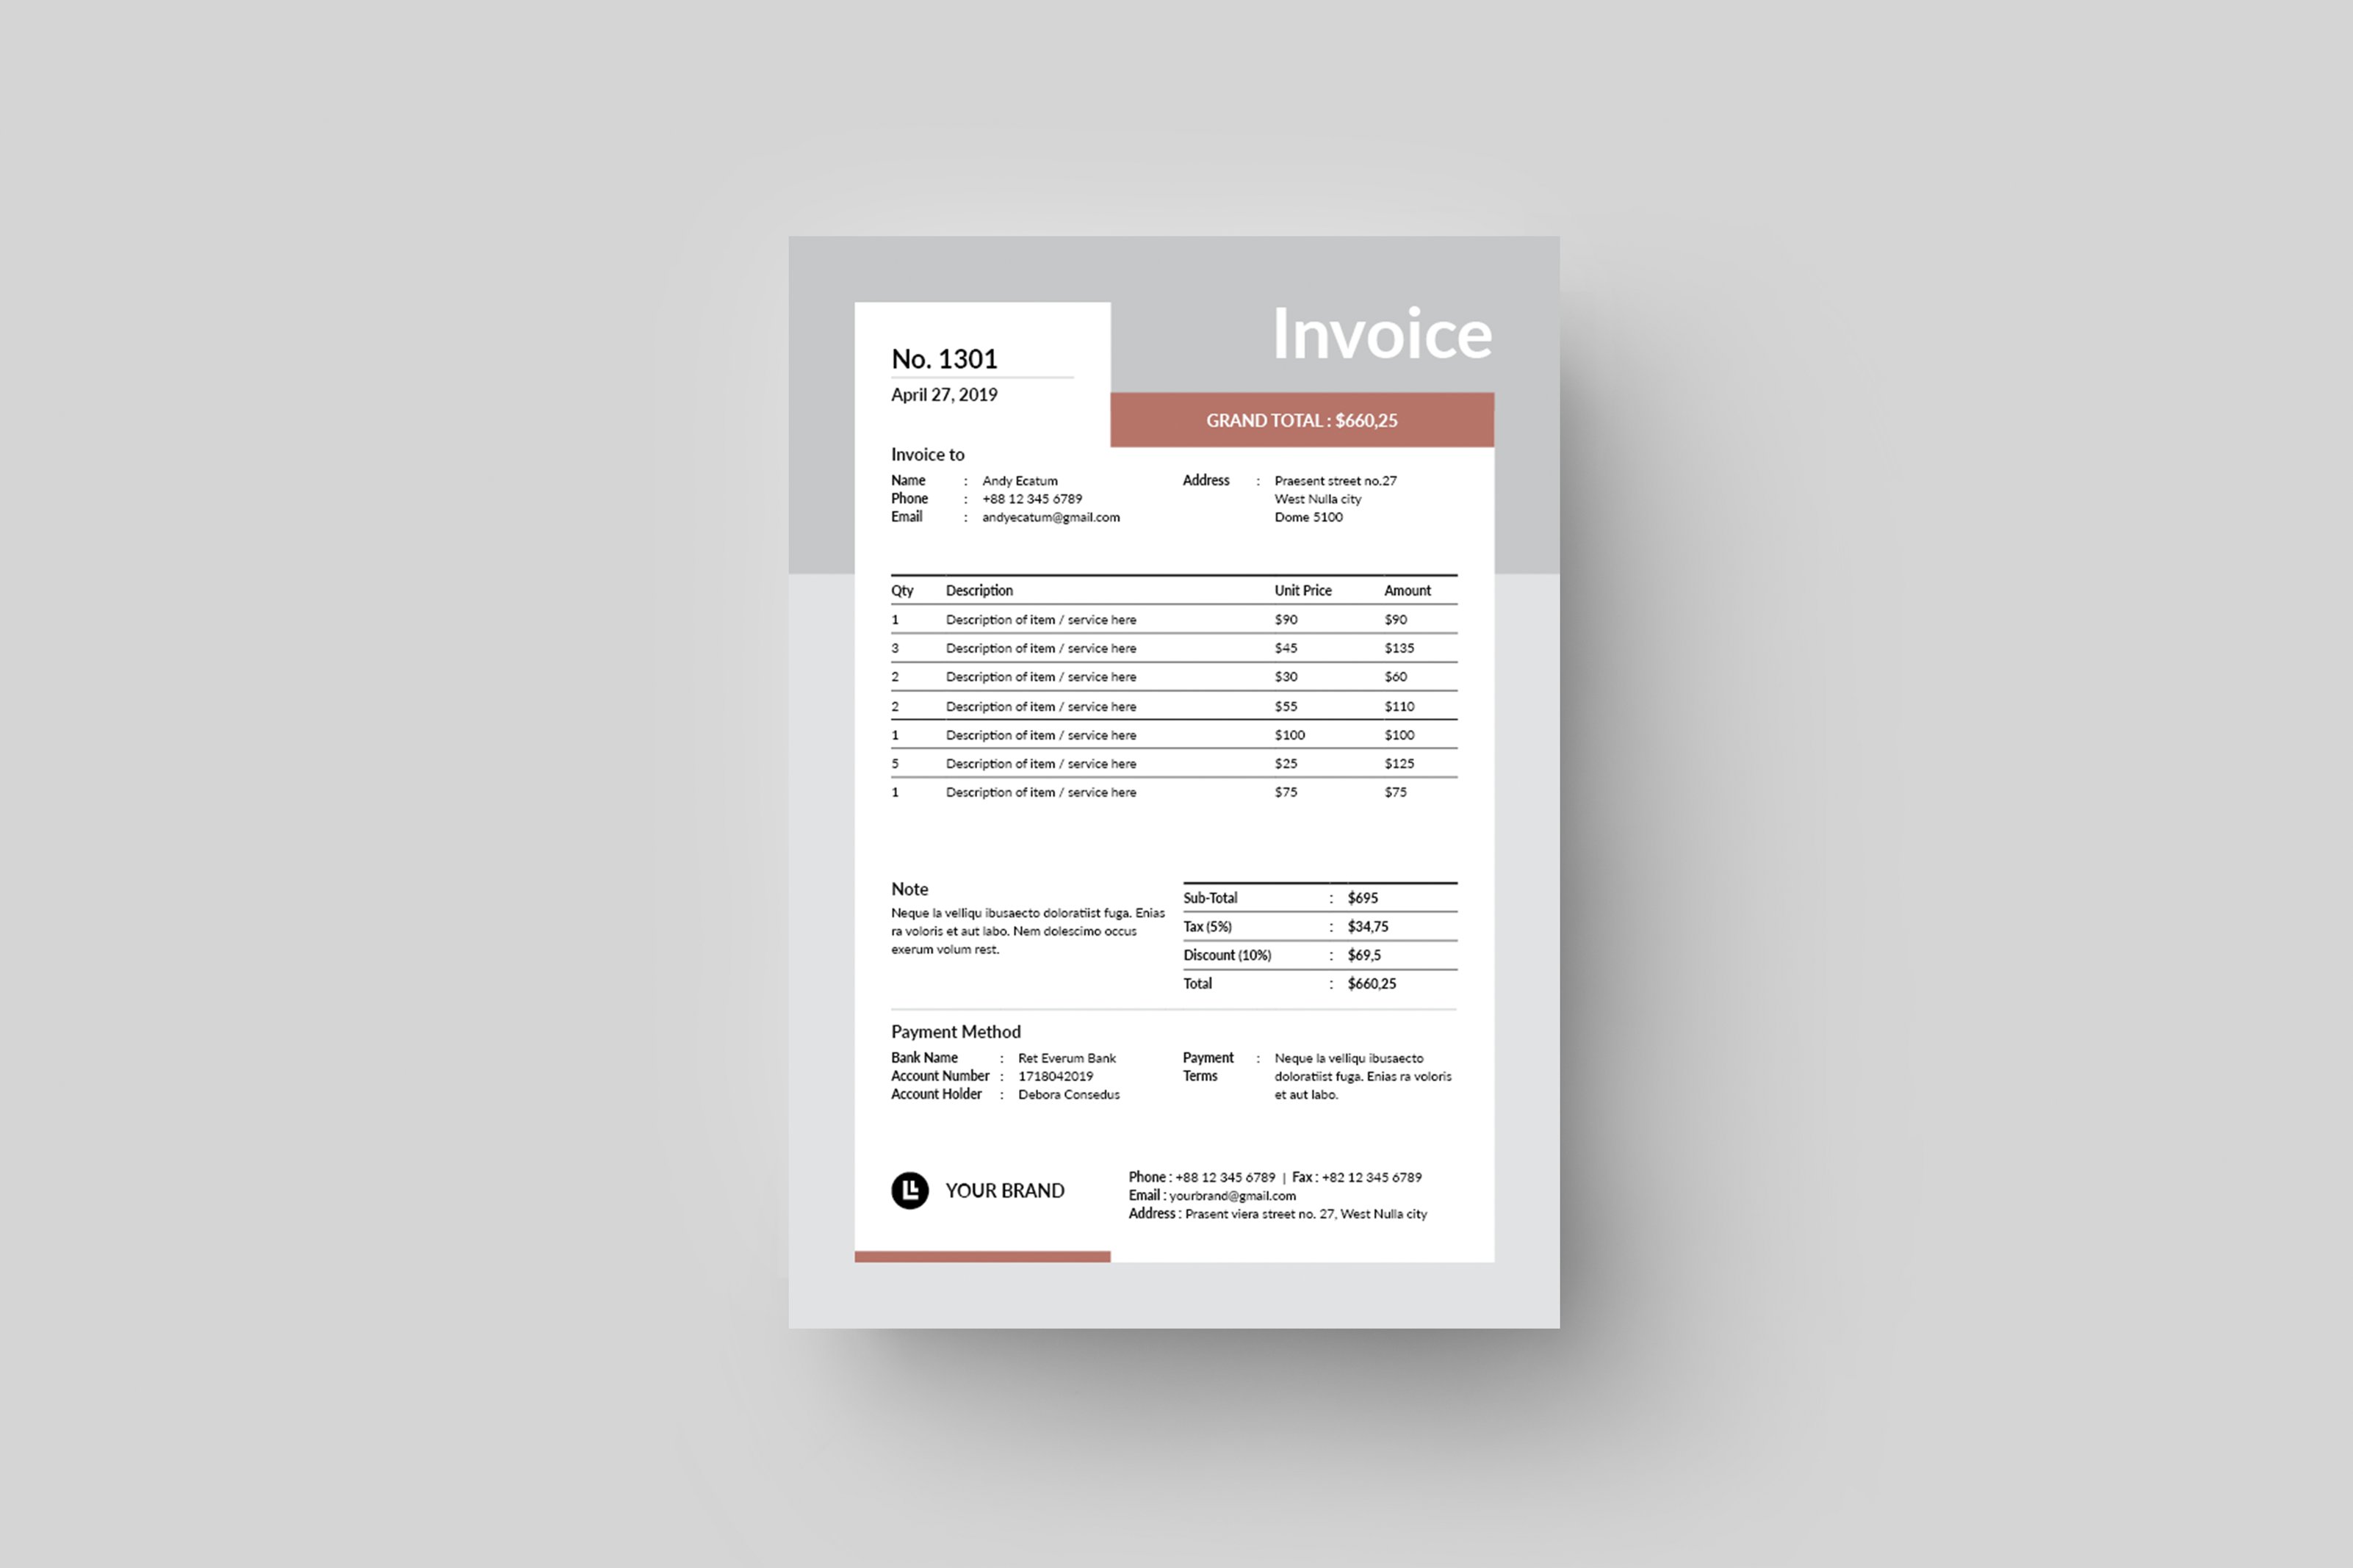 Invoice | MS Word & Indesign cover image.